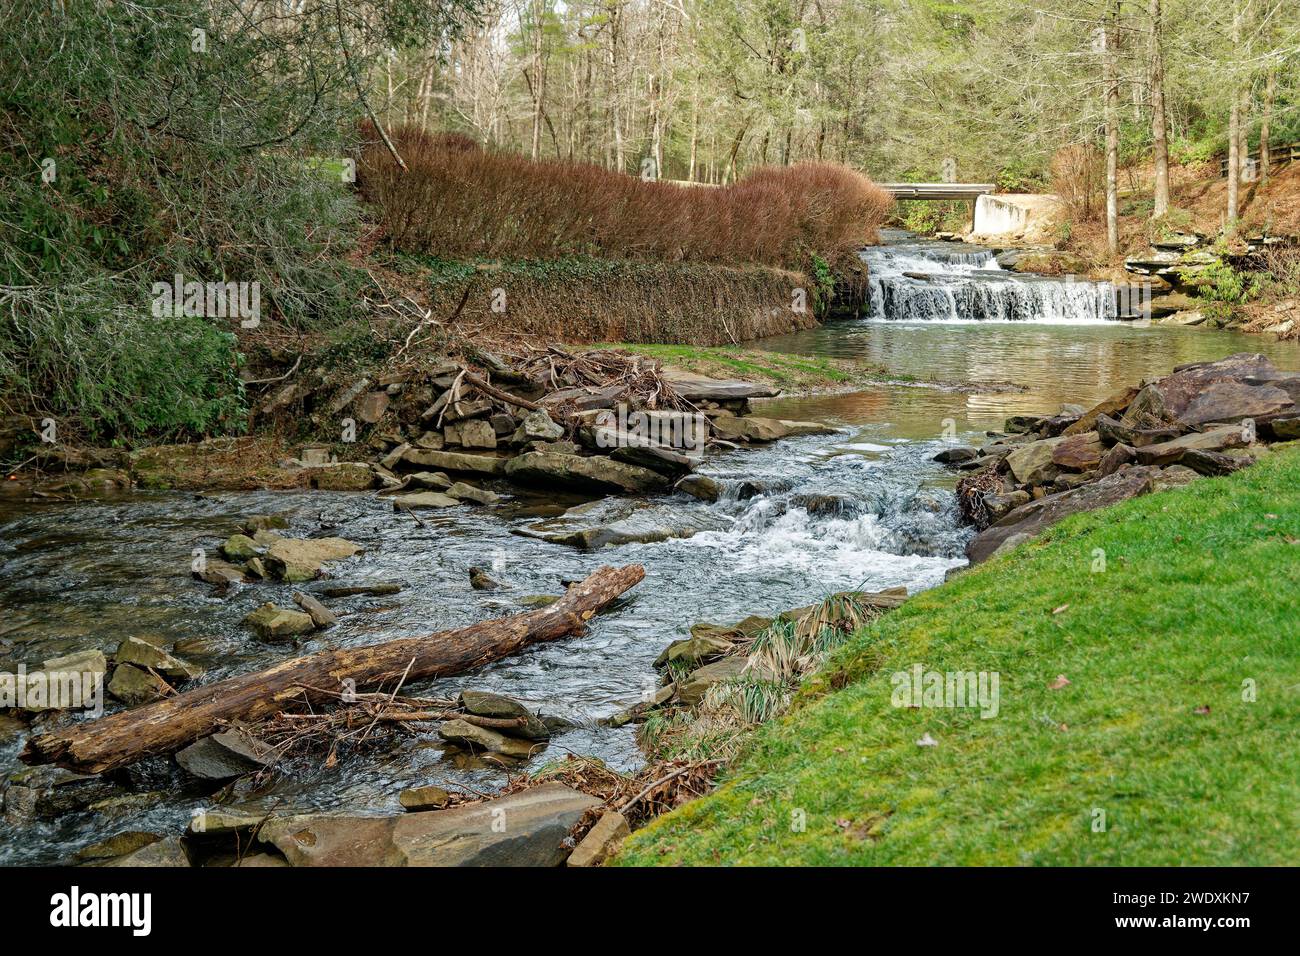 A creek with a small waterfall cascading down the boulders by a fallen log with a larger waterfall spilling into a pool of water in the background in Stock Photo